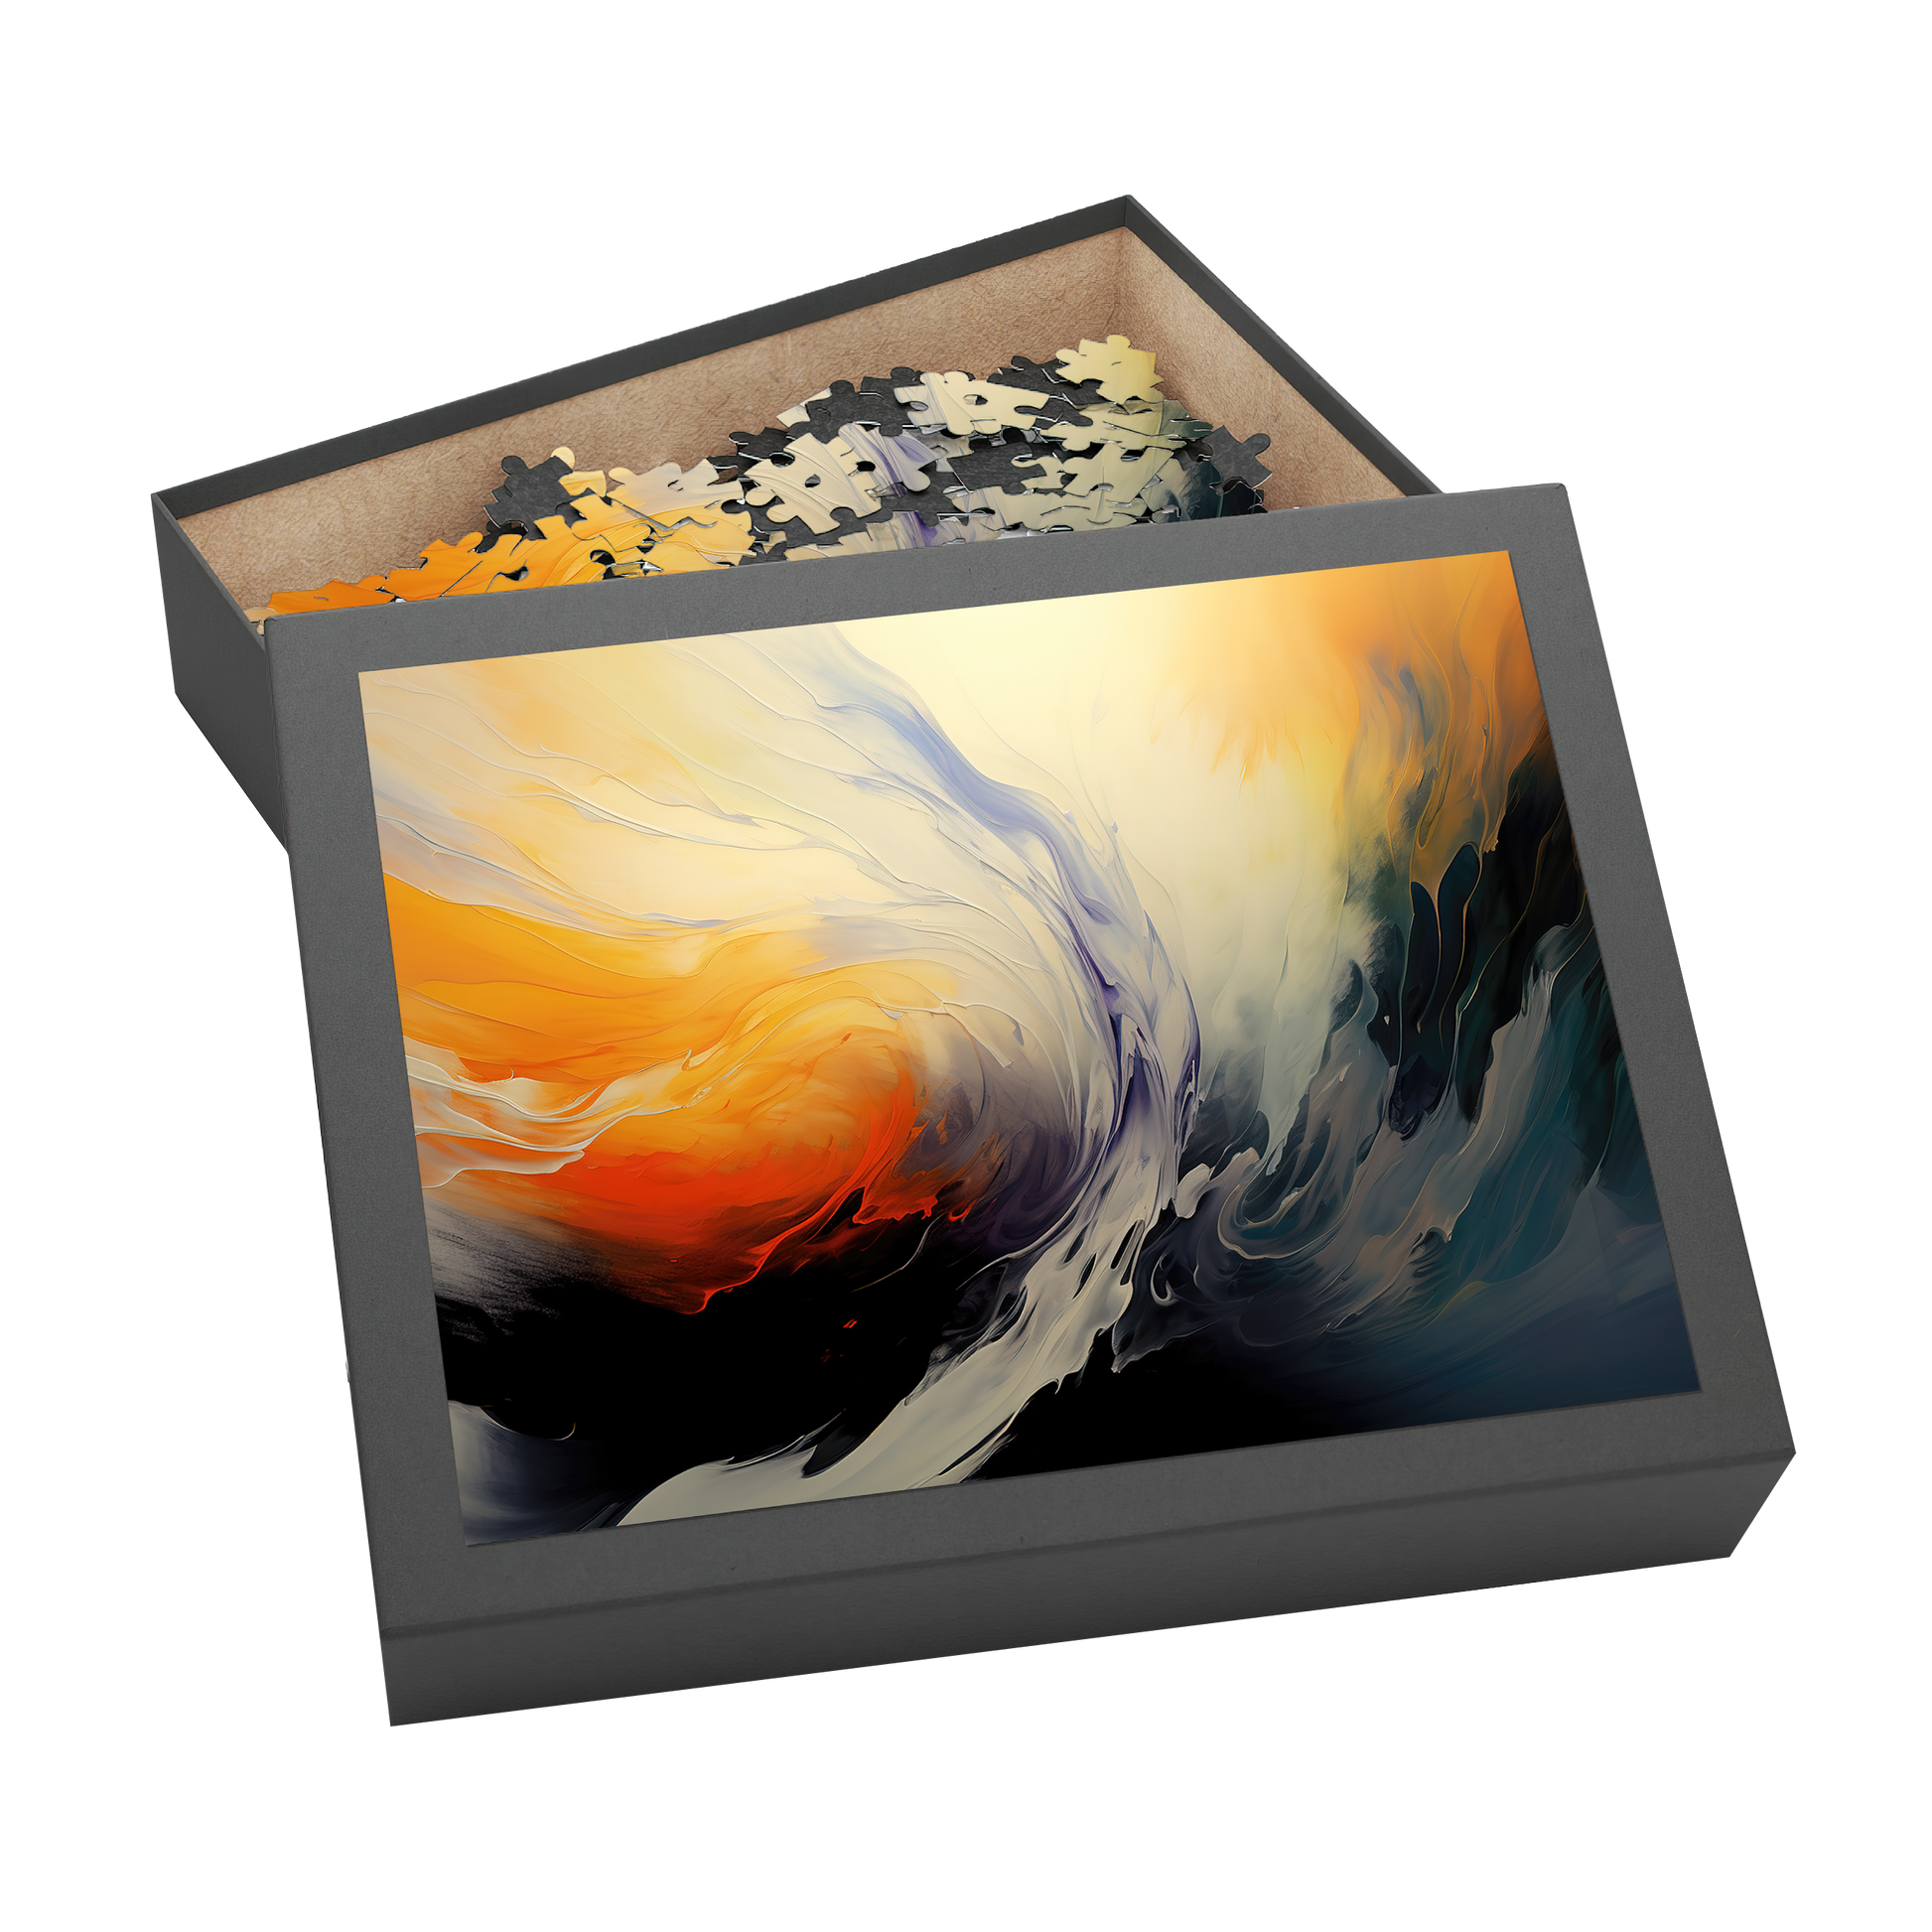 Splashout - Premium Jigsaw Puzzle, Vibrant, Abstract, Modern - Multiple Sizes Available